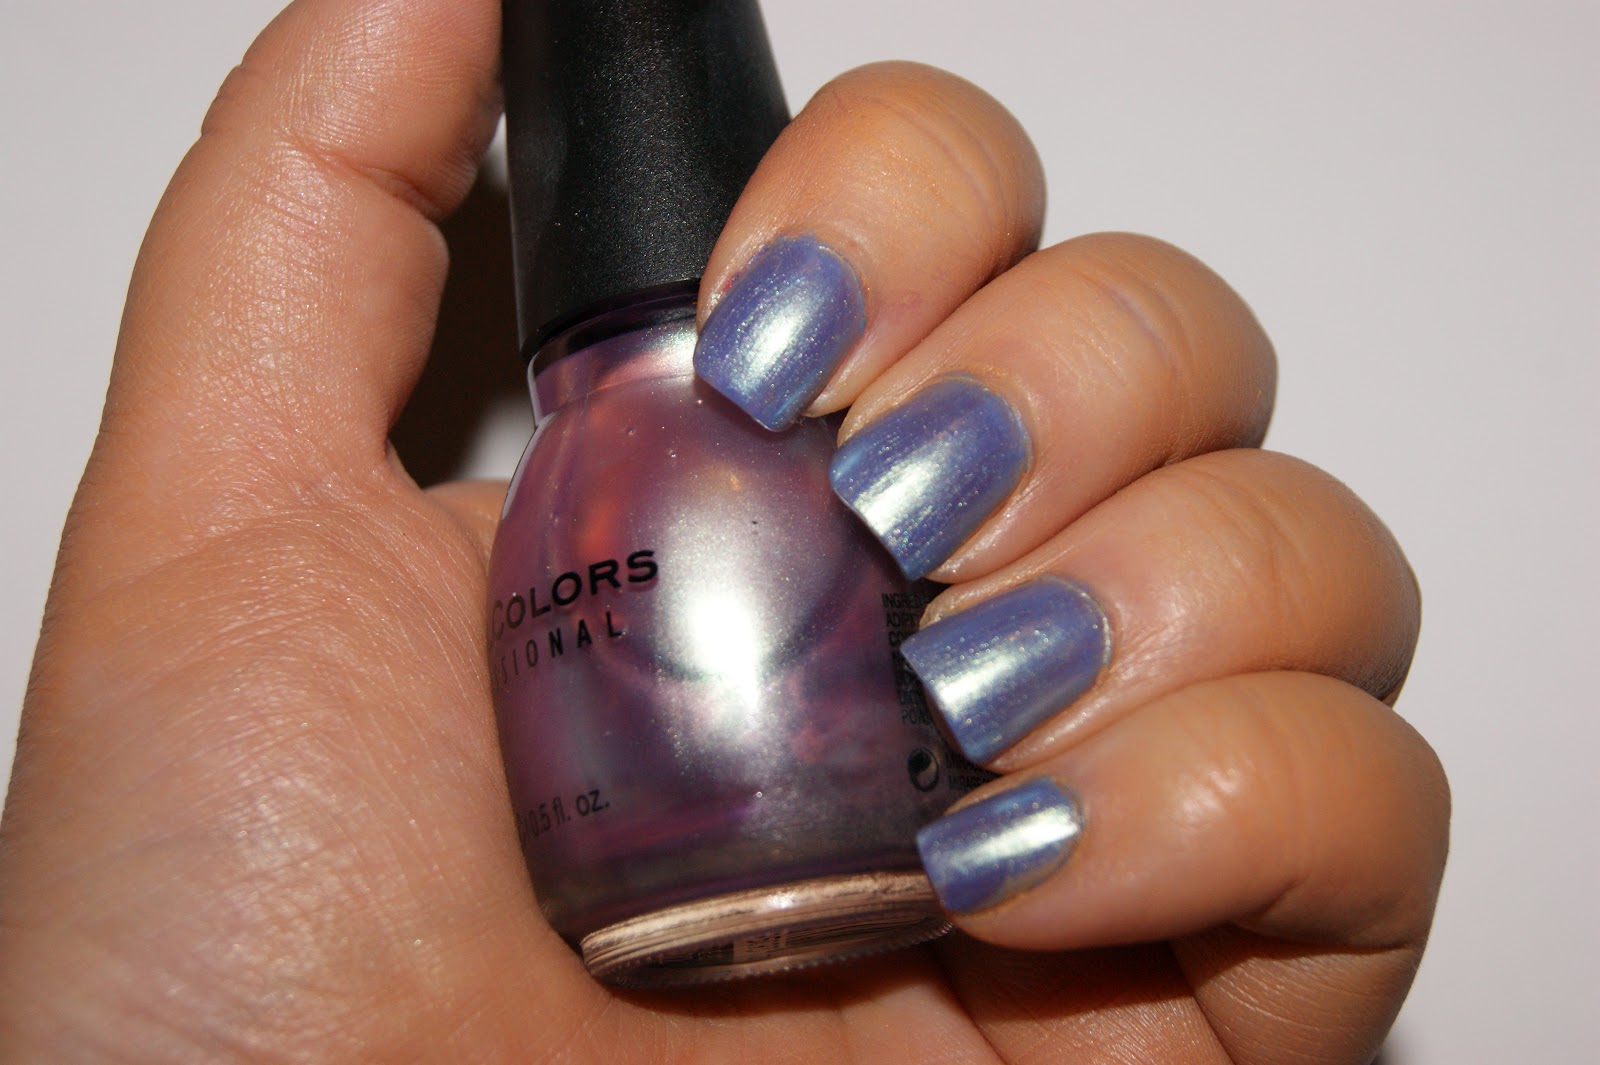 Sinful Colors Let Me Go Nail Polish - Review and N.O.T.D | The Sunday Girl